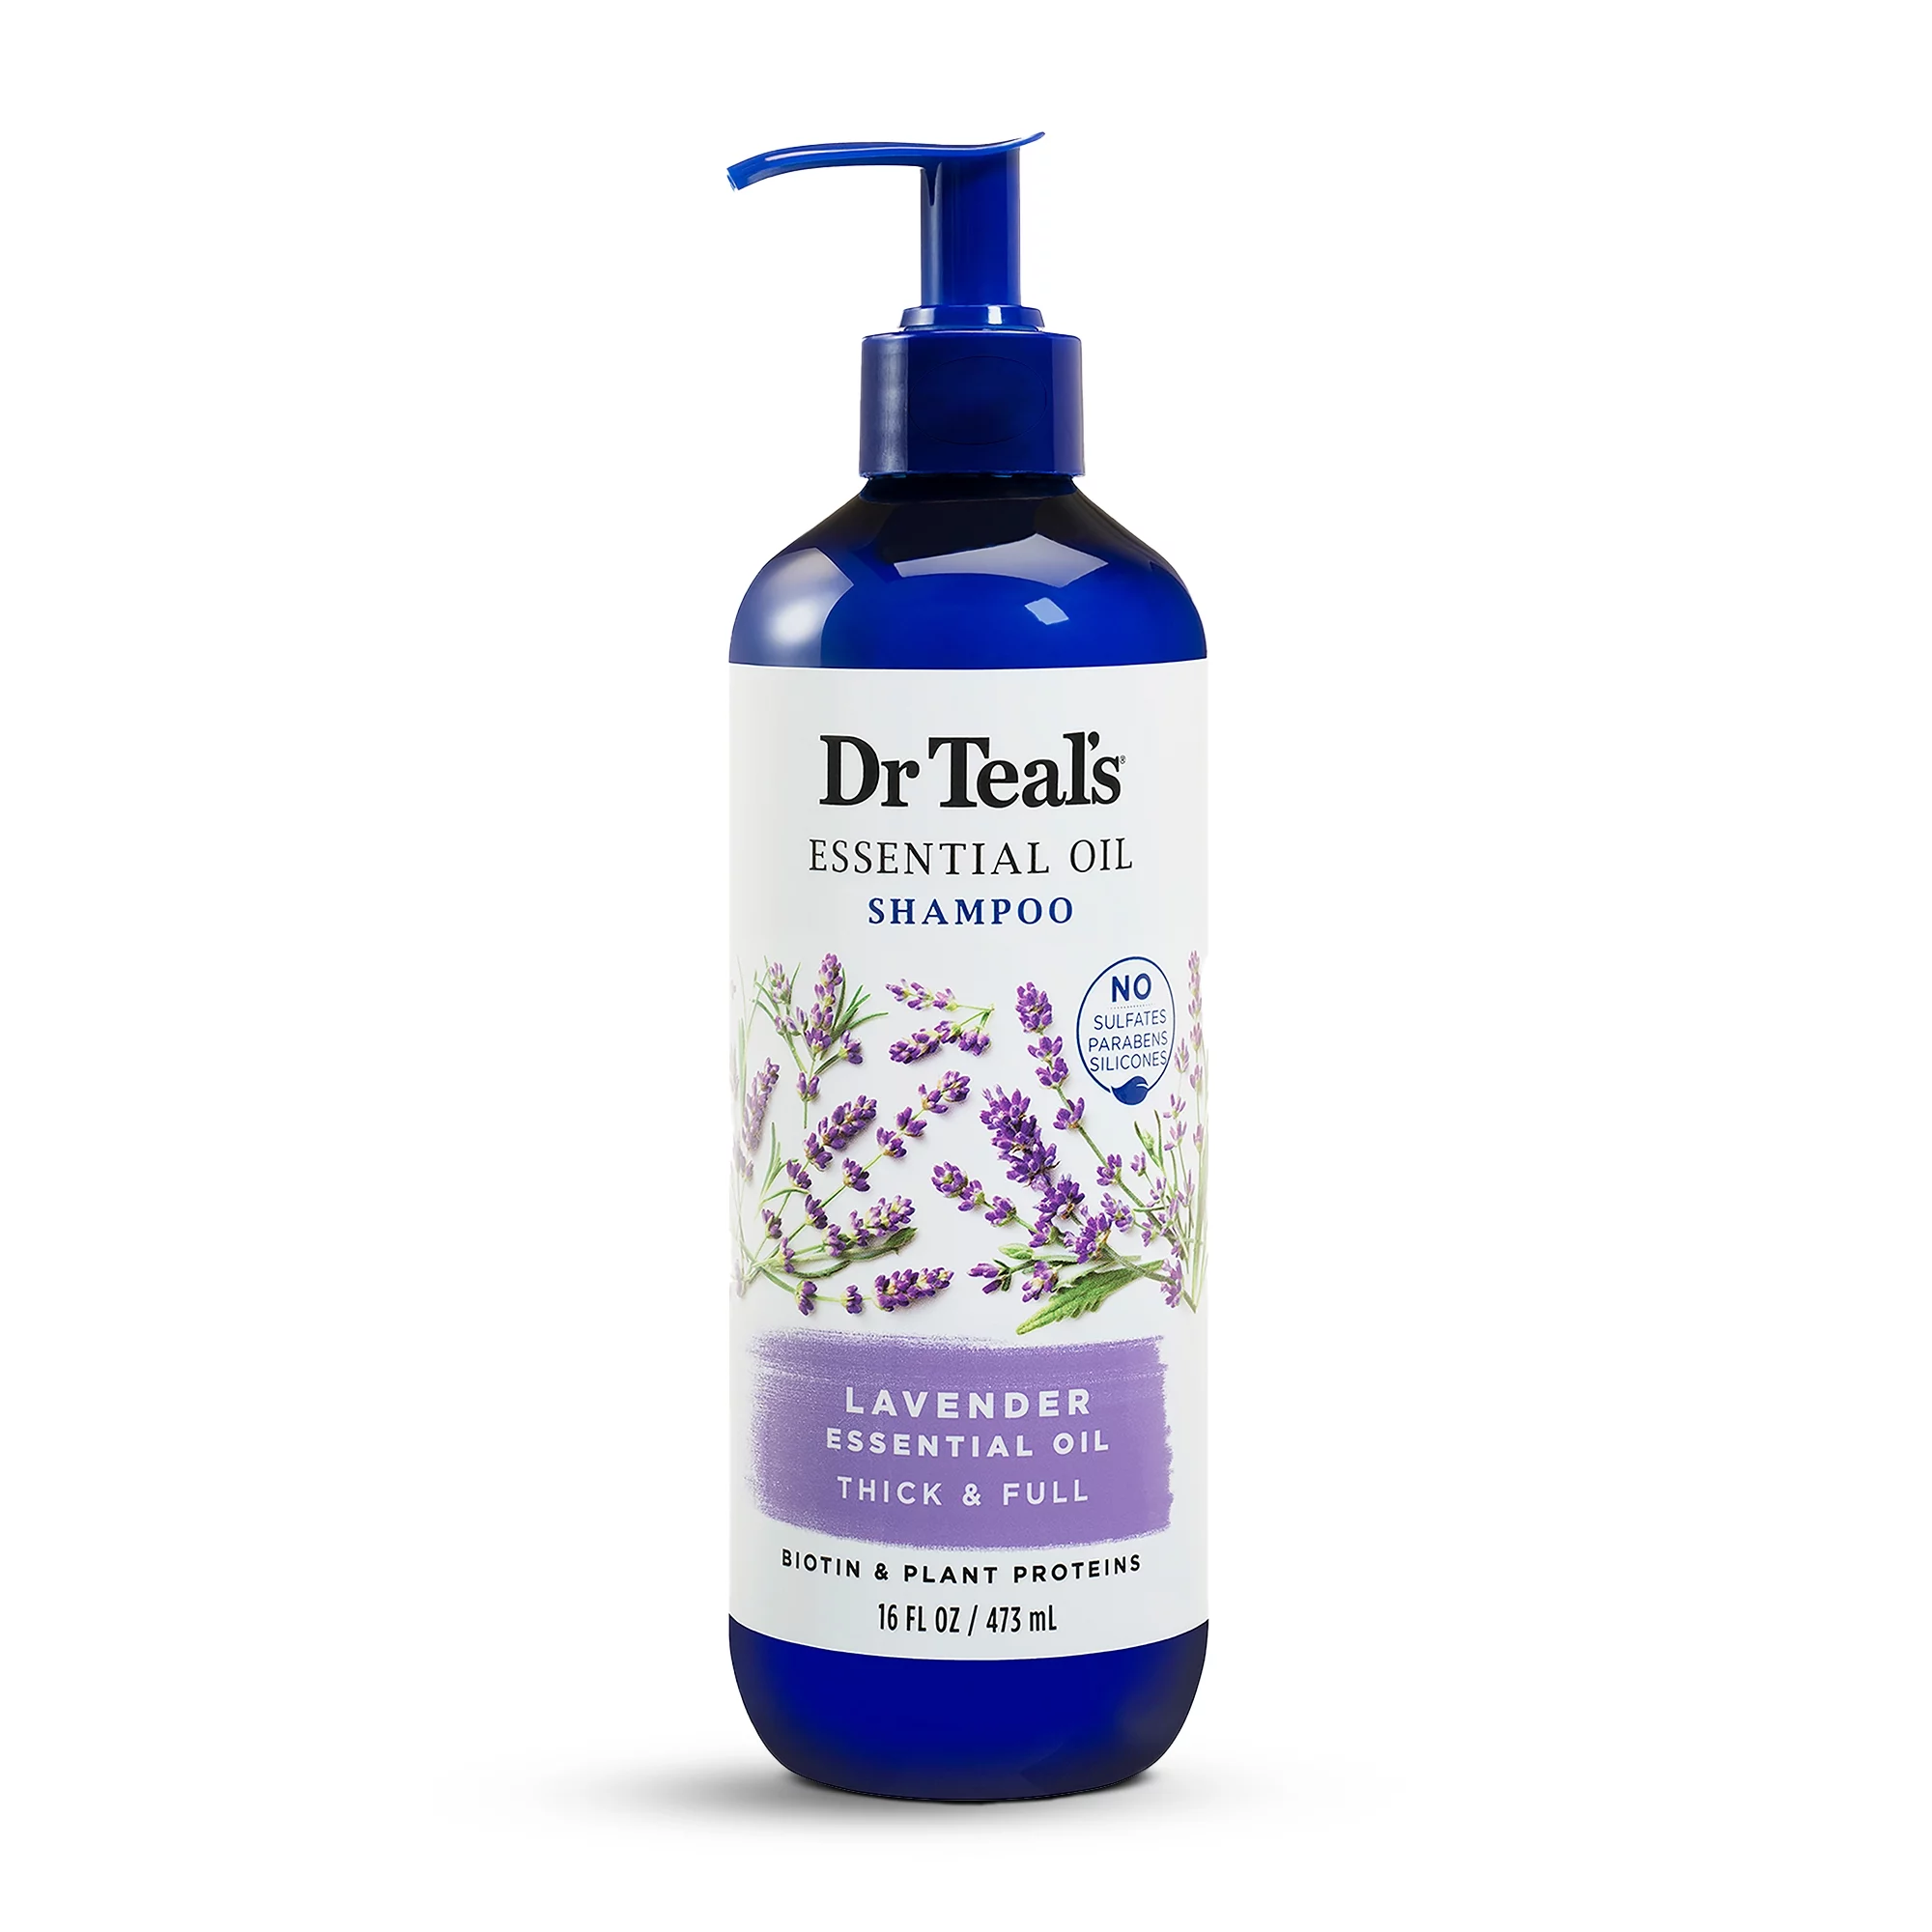 Dr Teal's Essential Oil Volumizing Daily Shampoo with Lavender, 16 fl oz